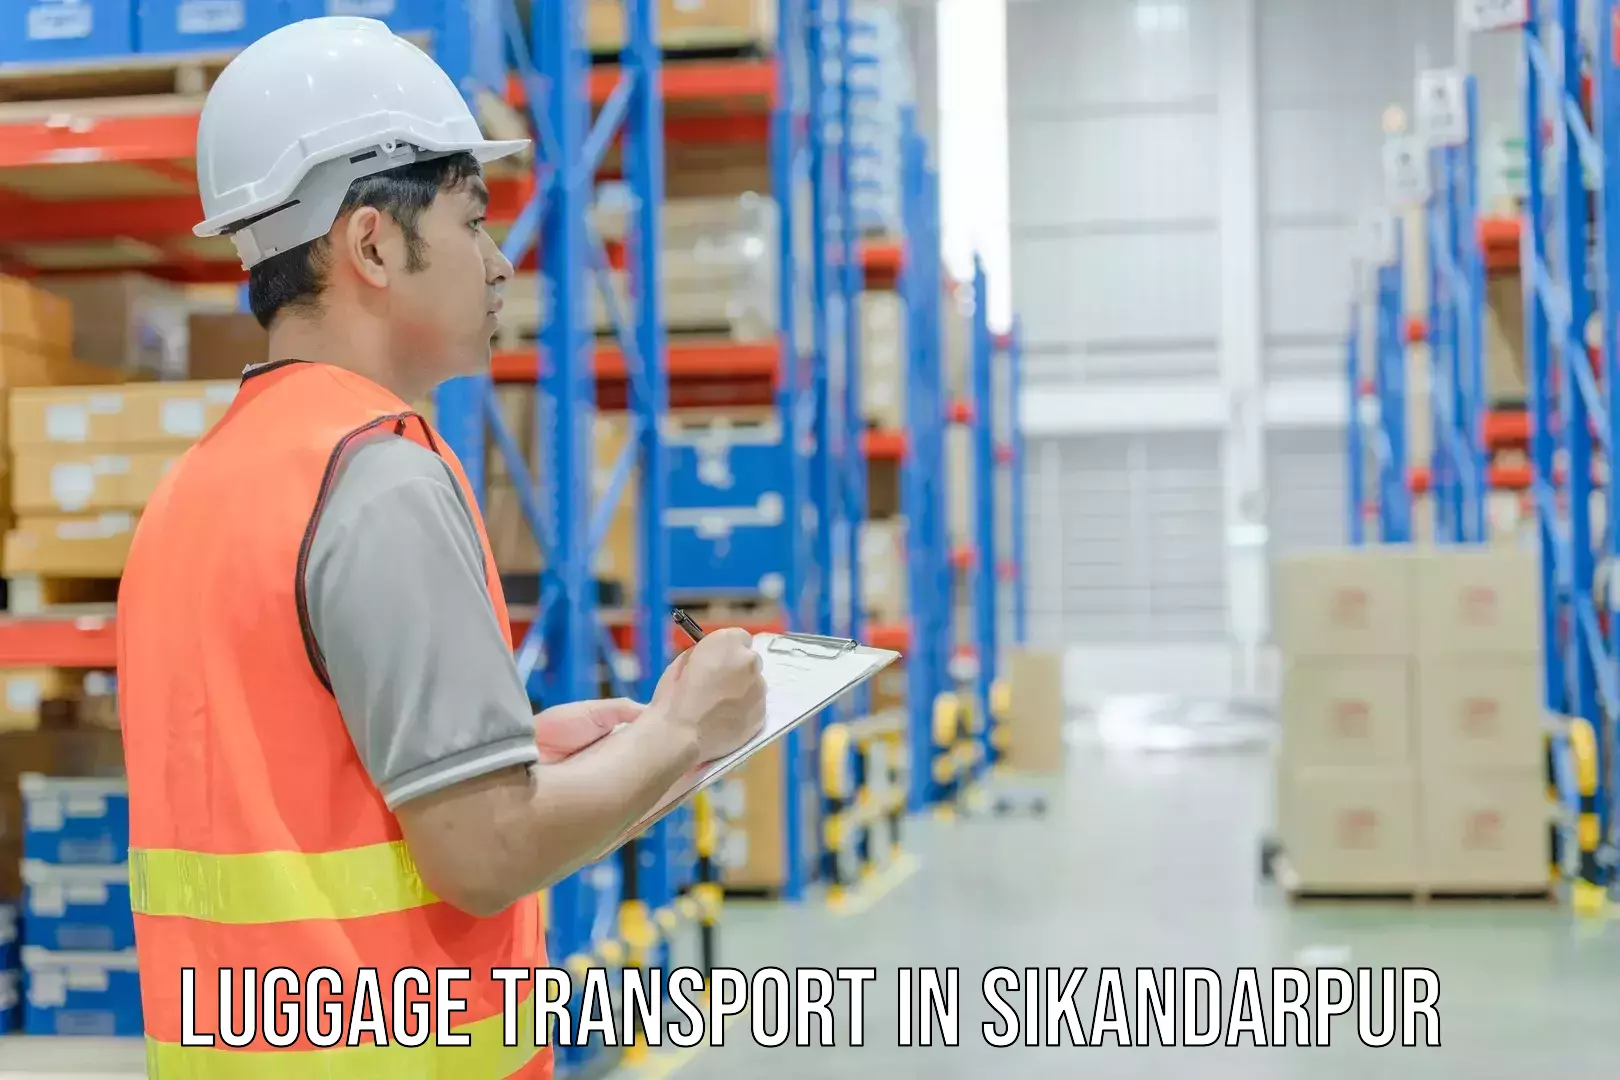 Nationwide luggage transport in Sikandarpur